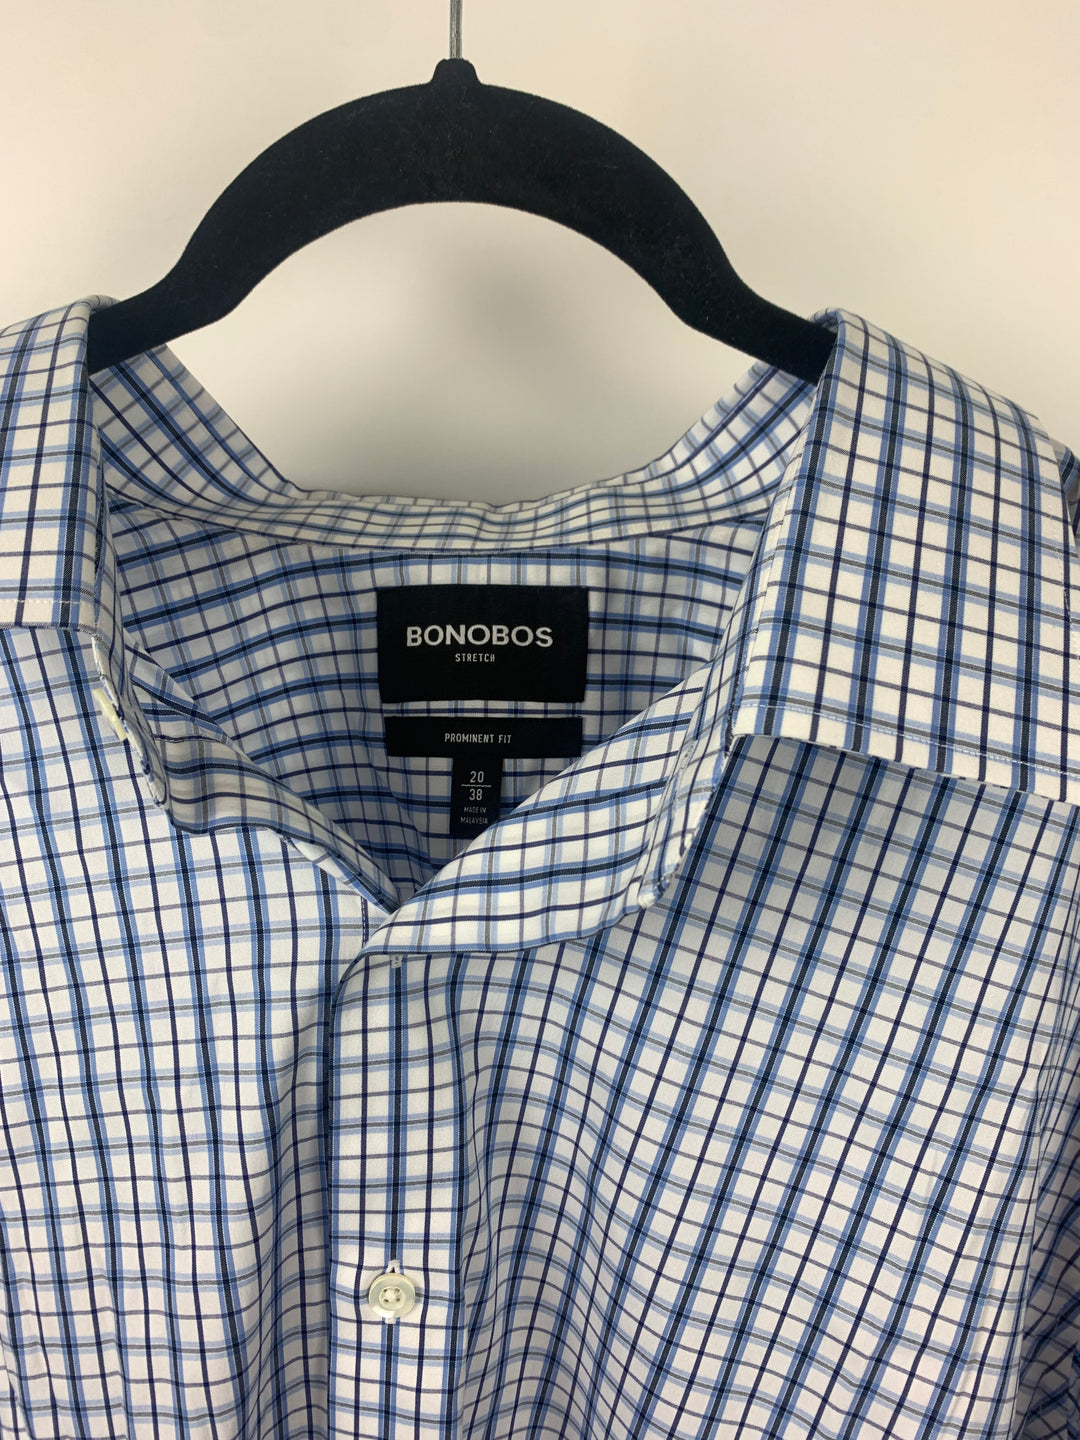 MENS Blue And White Long Sleeve Shirt - Size 20/38